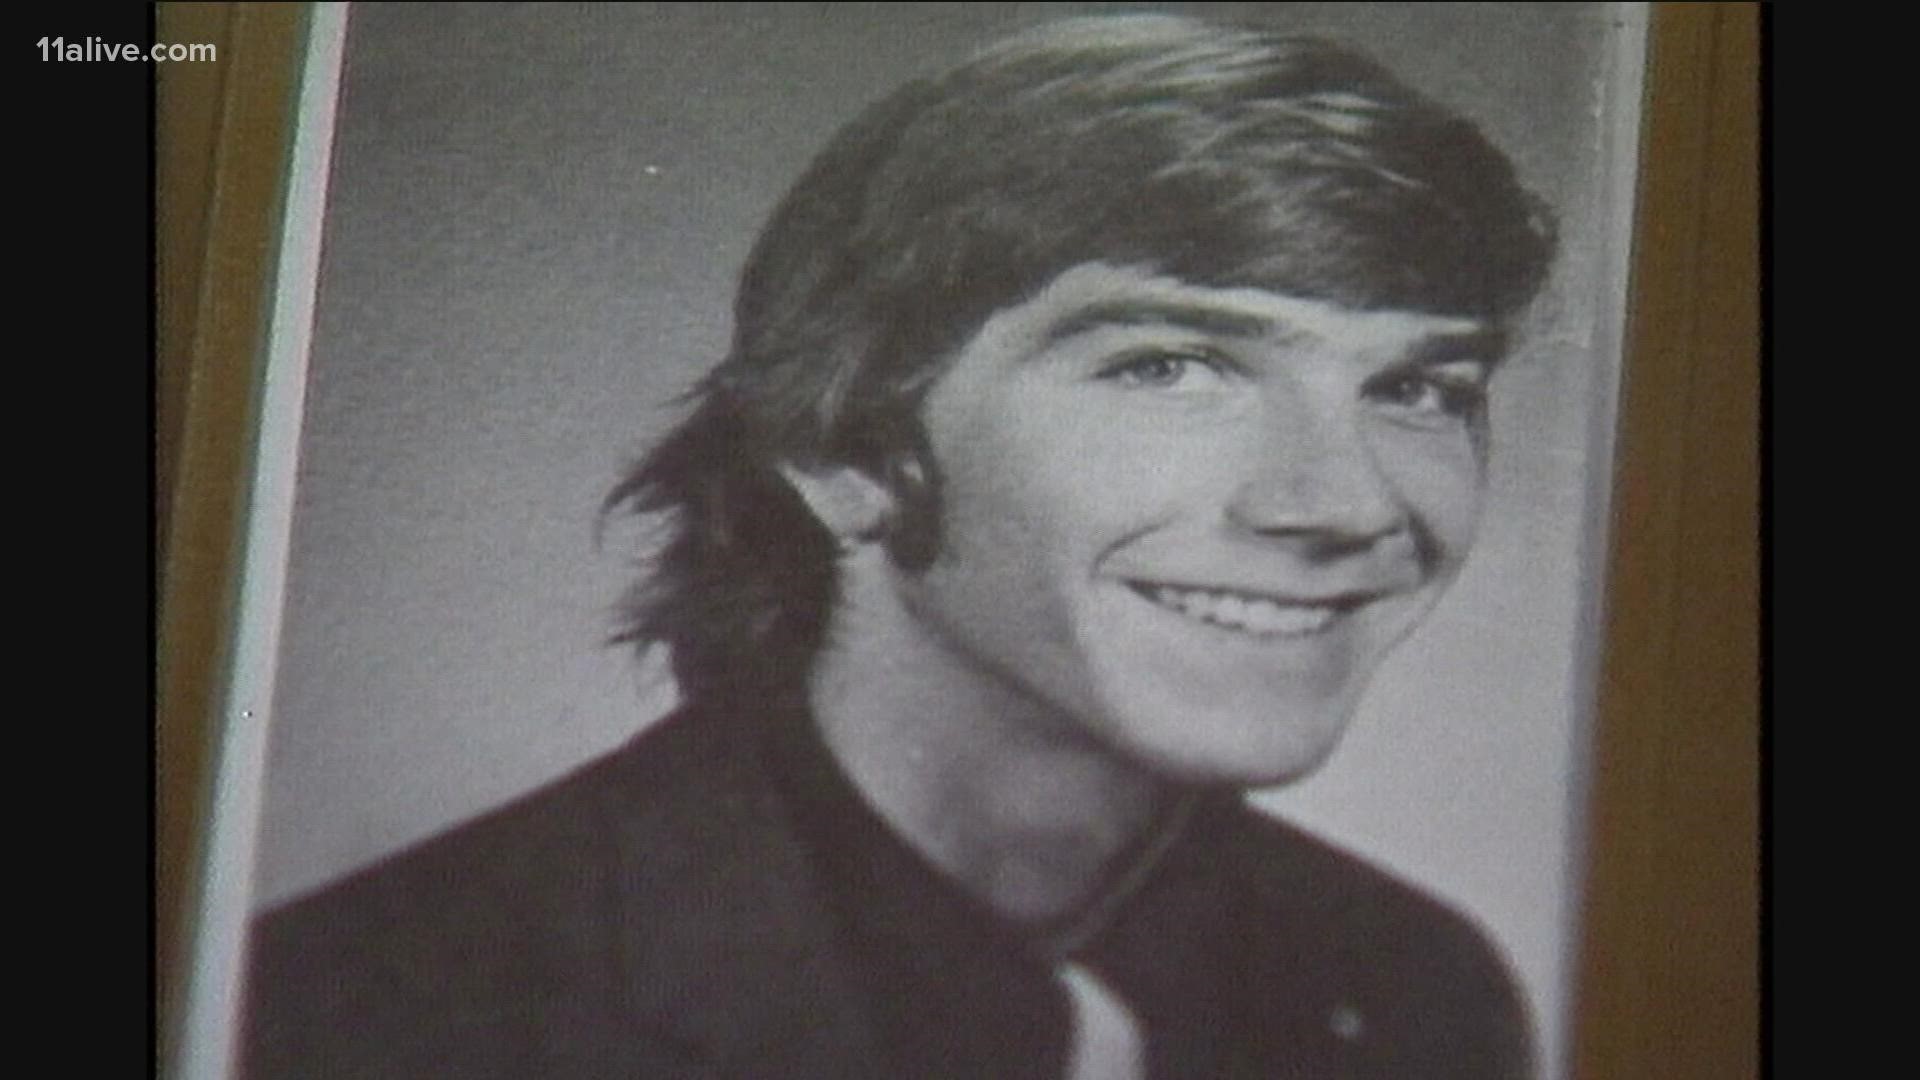 Kyle Clinkscales, an Auburn University student from LaGrange, Georgia, went missing in 1976 after leaving on his way to school.